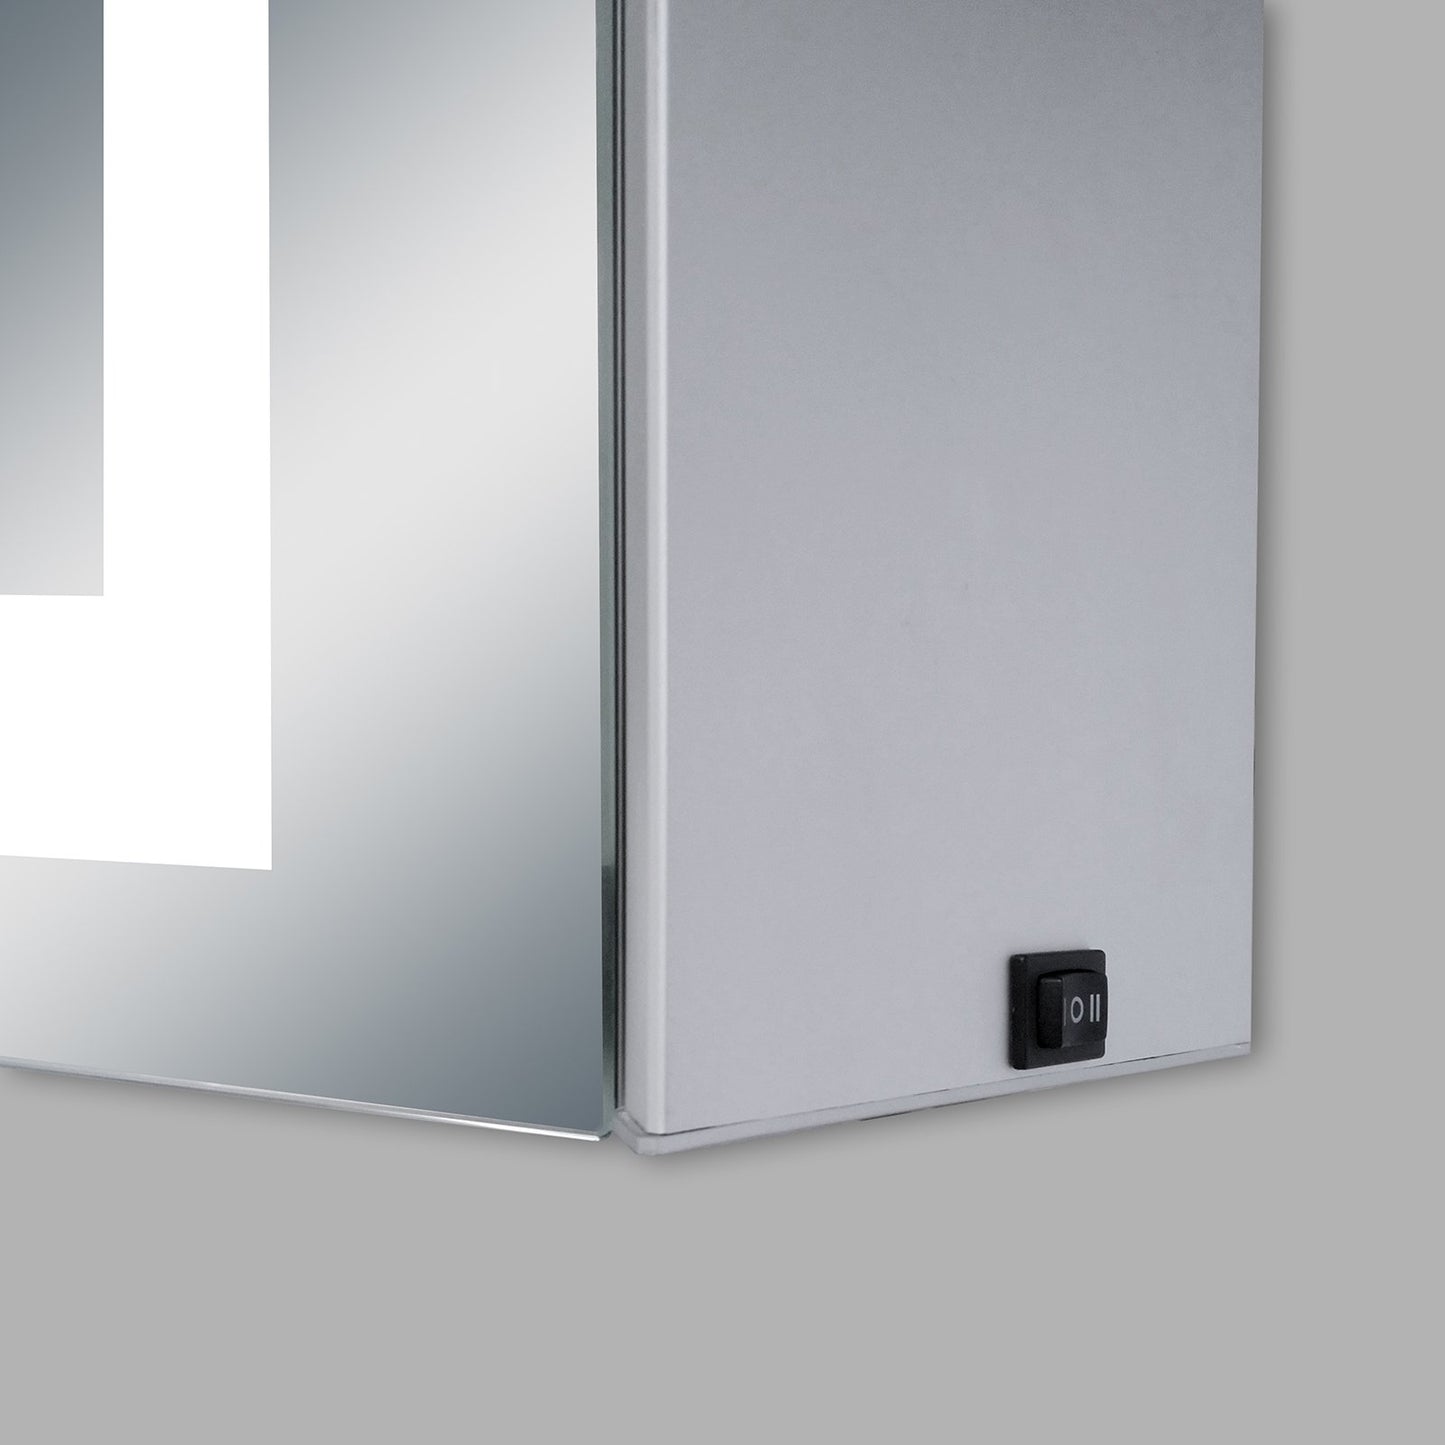 led-lighted-bathroom-mirror-cabinet-double-sided-mirror-on-off-switch-benign-style